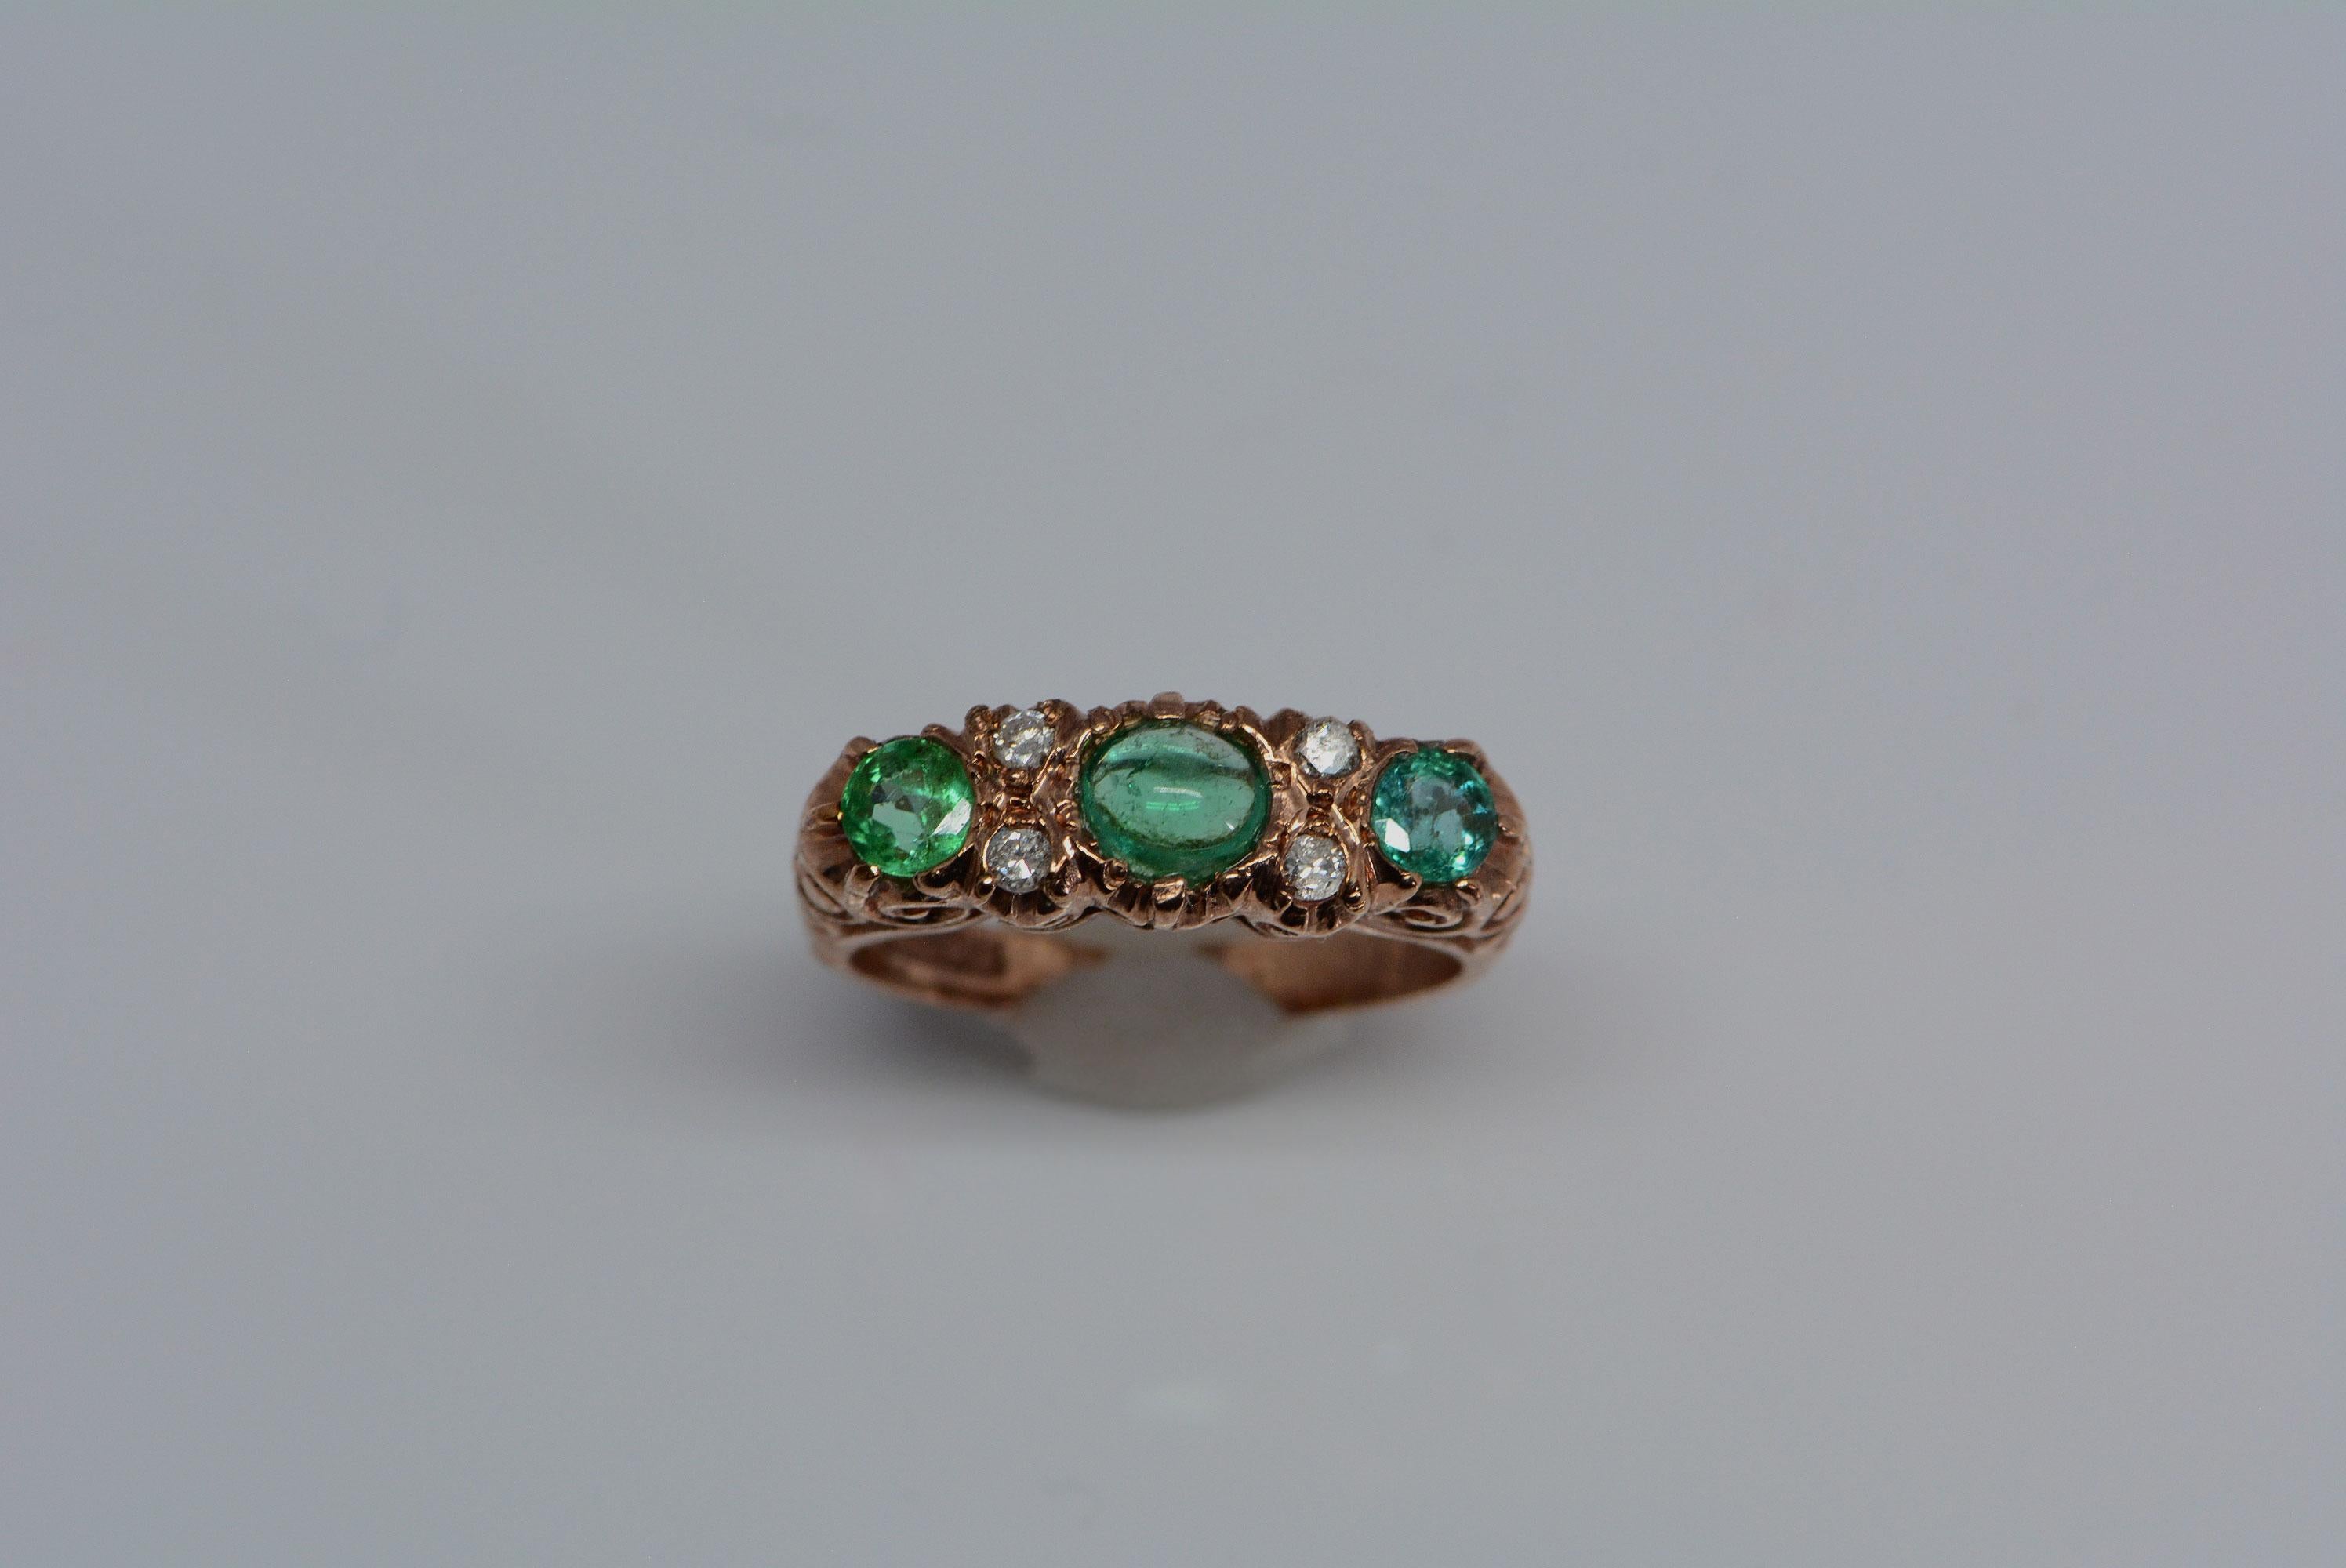 You'll find yourself lost in the details of this exquisite english ring: the vivid red tone of the hand-carved rose gold band against the emeralds is pleasing to the eye.

The ring has a total of three emeralds serving as the center stones, which